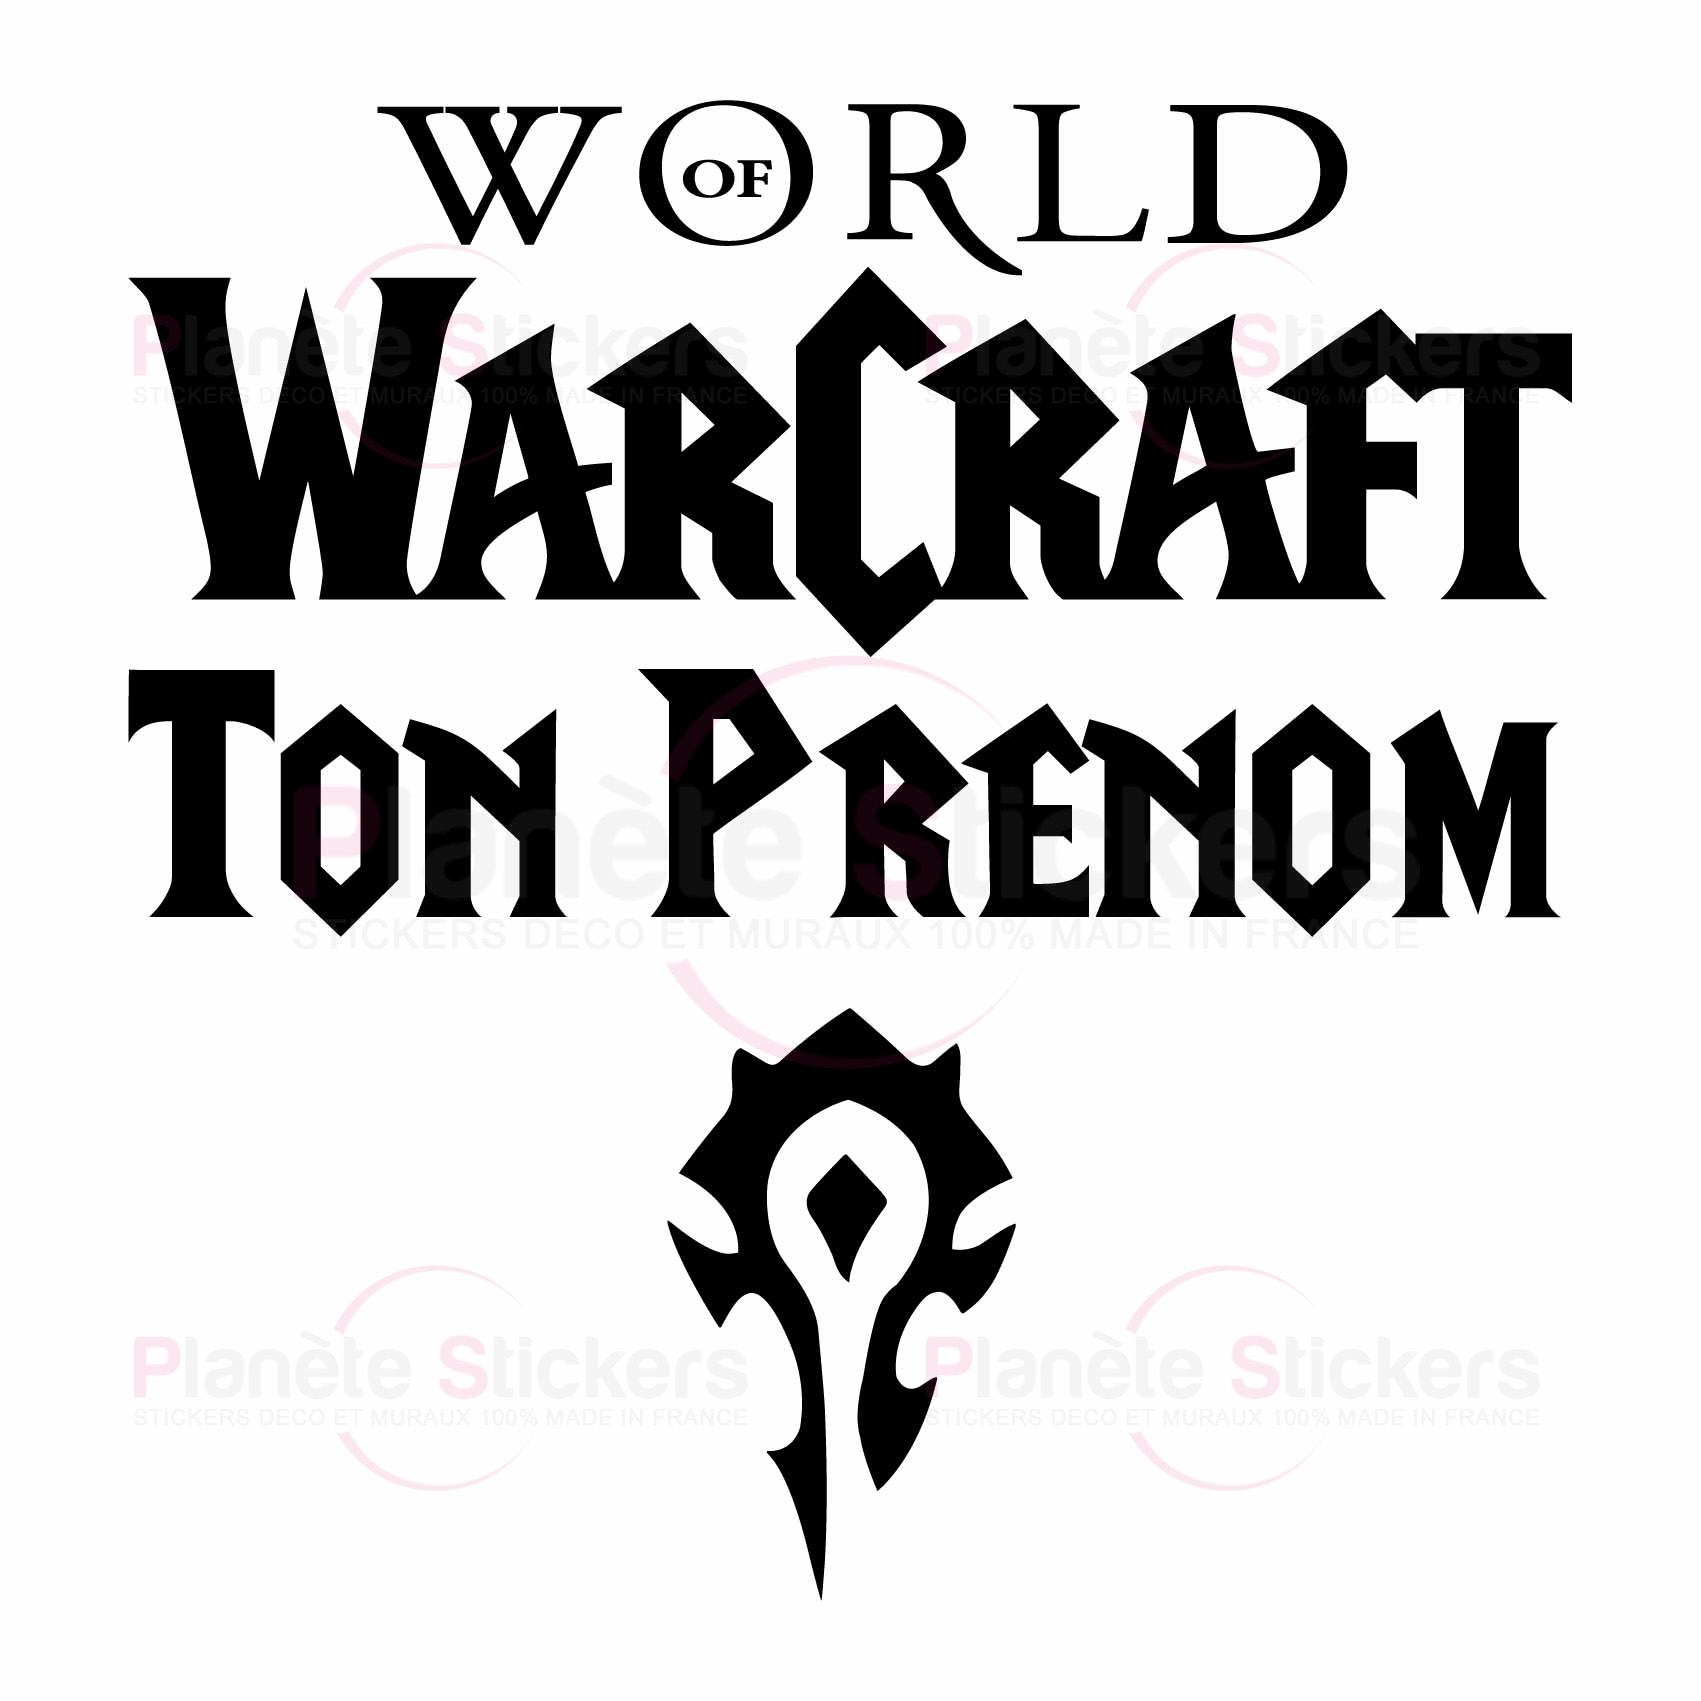 stickers-wow-horde-prenom-personnalisé-ref14wow-stickers-muraux-world-of-warcraft-autocollant-mural-jeux-video-sticker-gamer-deco-gaming-salon-chambre-(2)